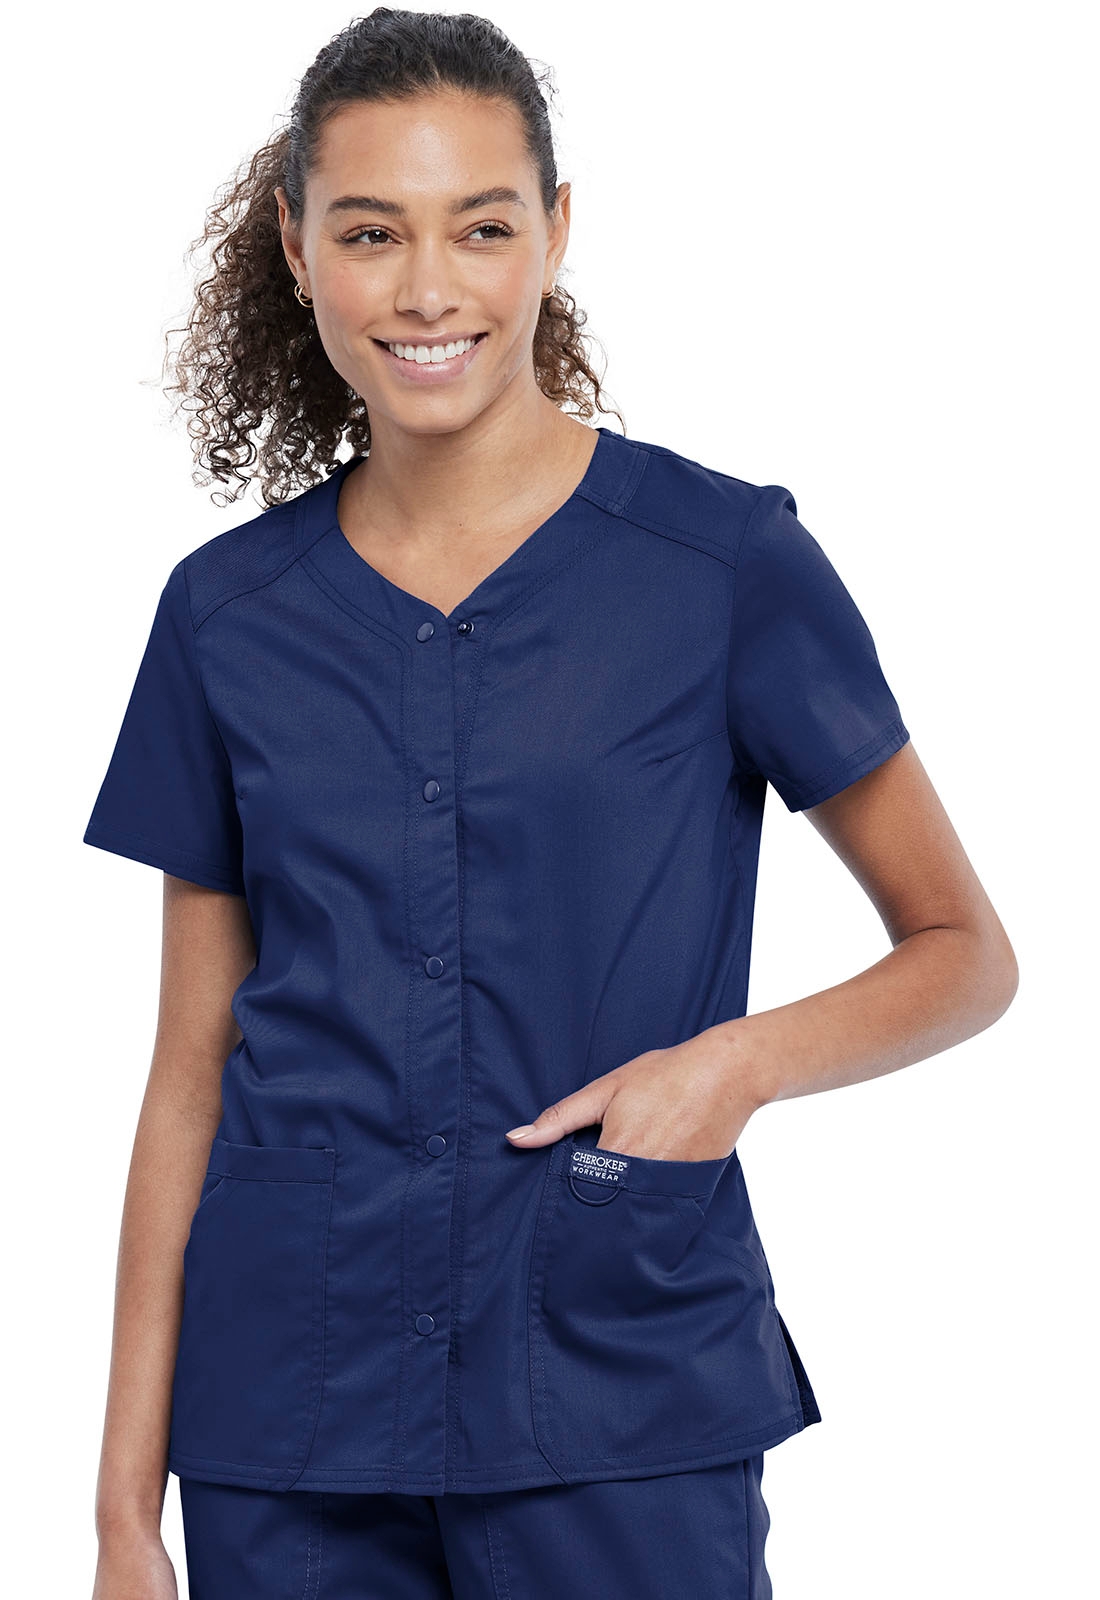 Infinity Scrubs by Cherokee Uniforms - Fashion Forward Outfit of the Day